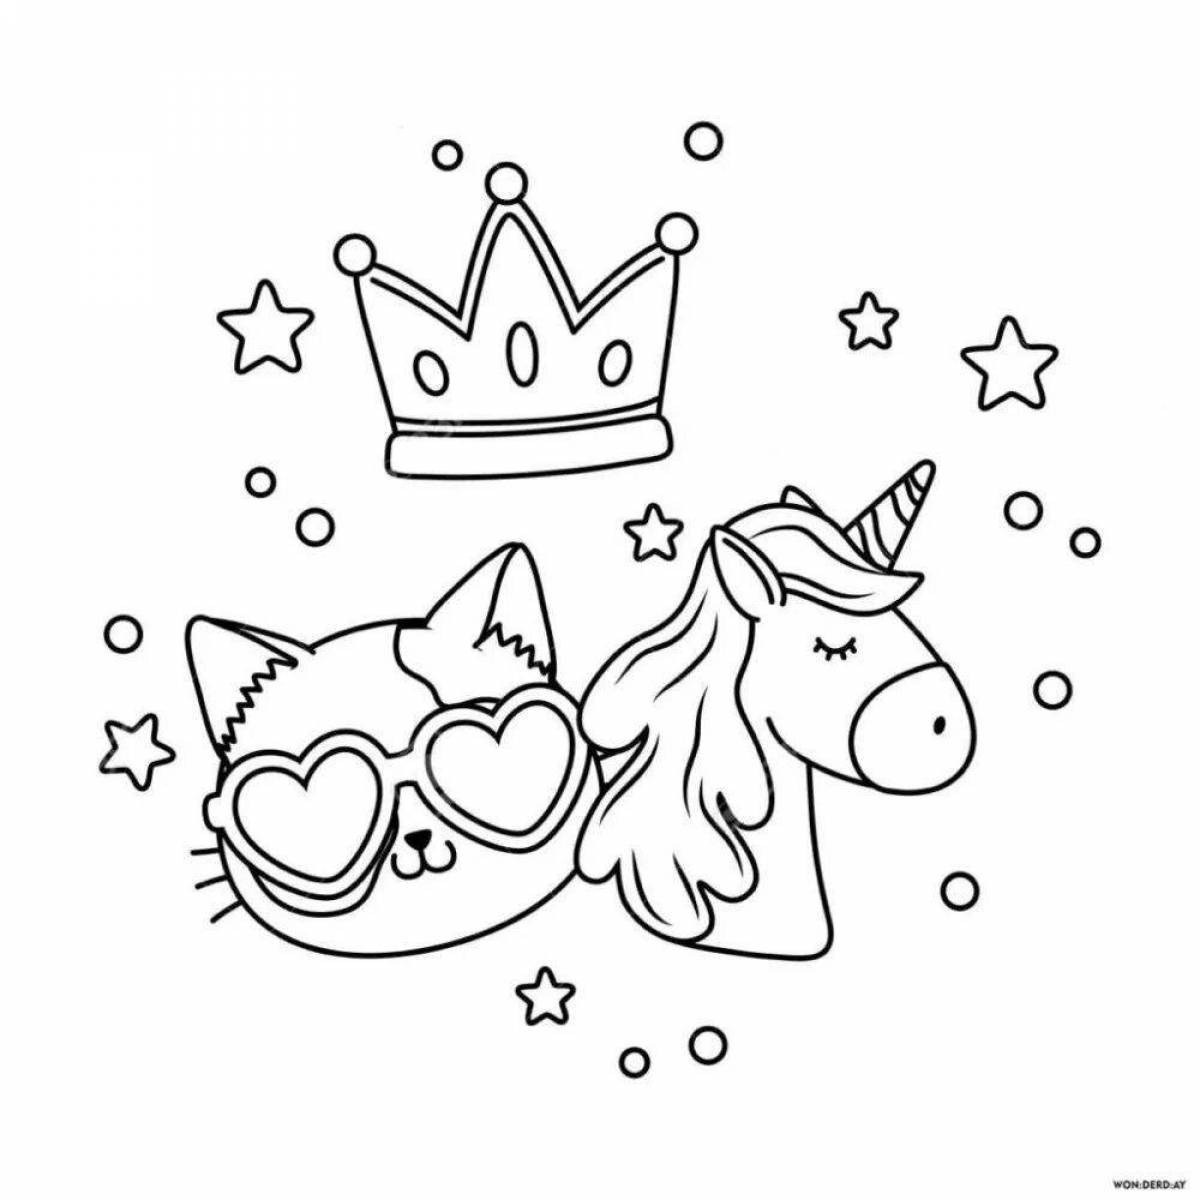 Exotic unicorn cat coloring pages for girls